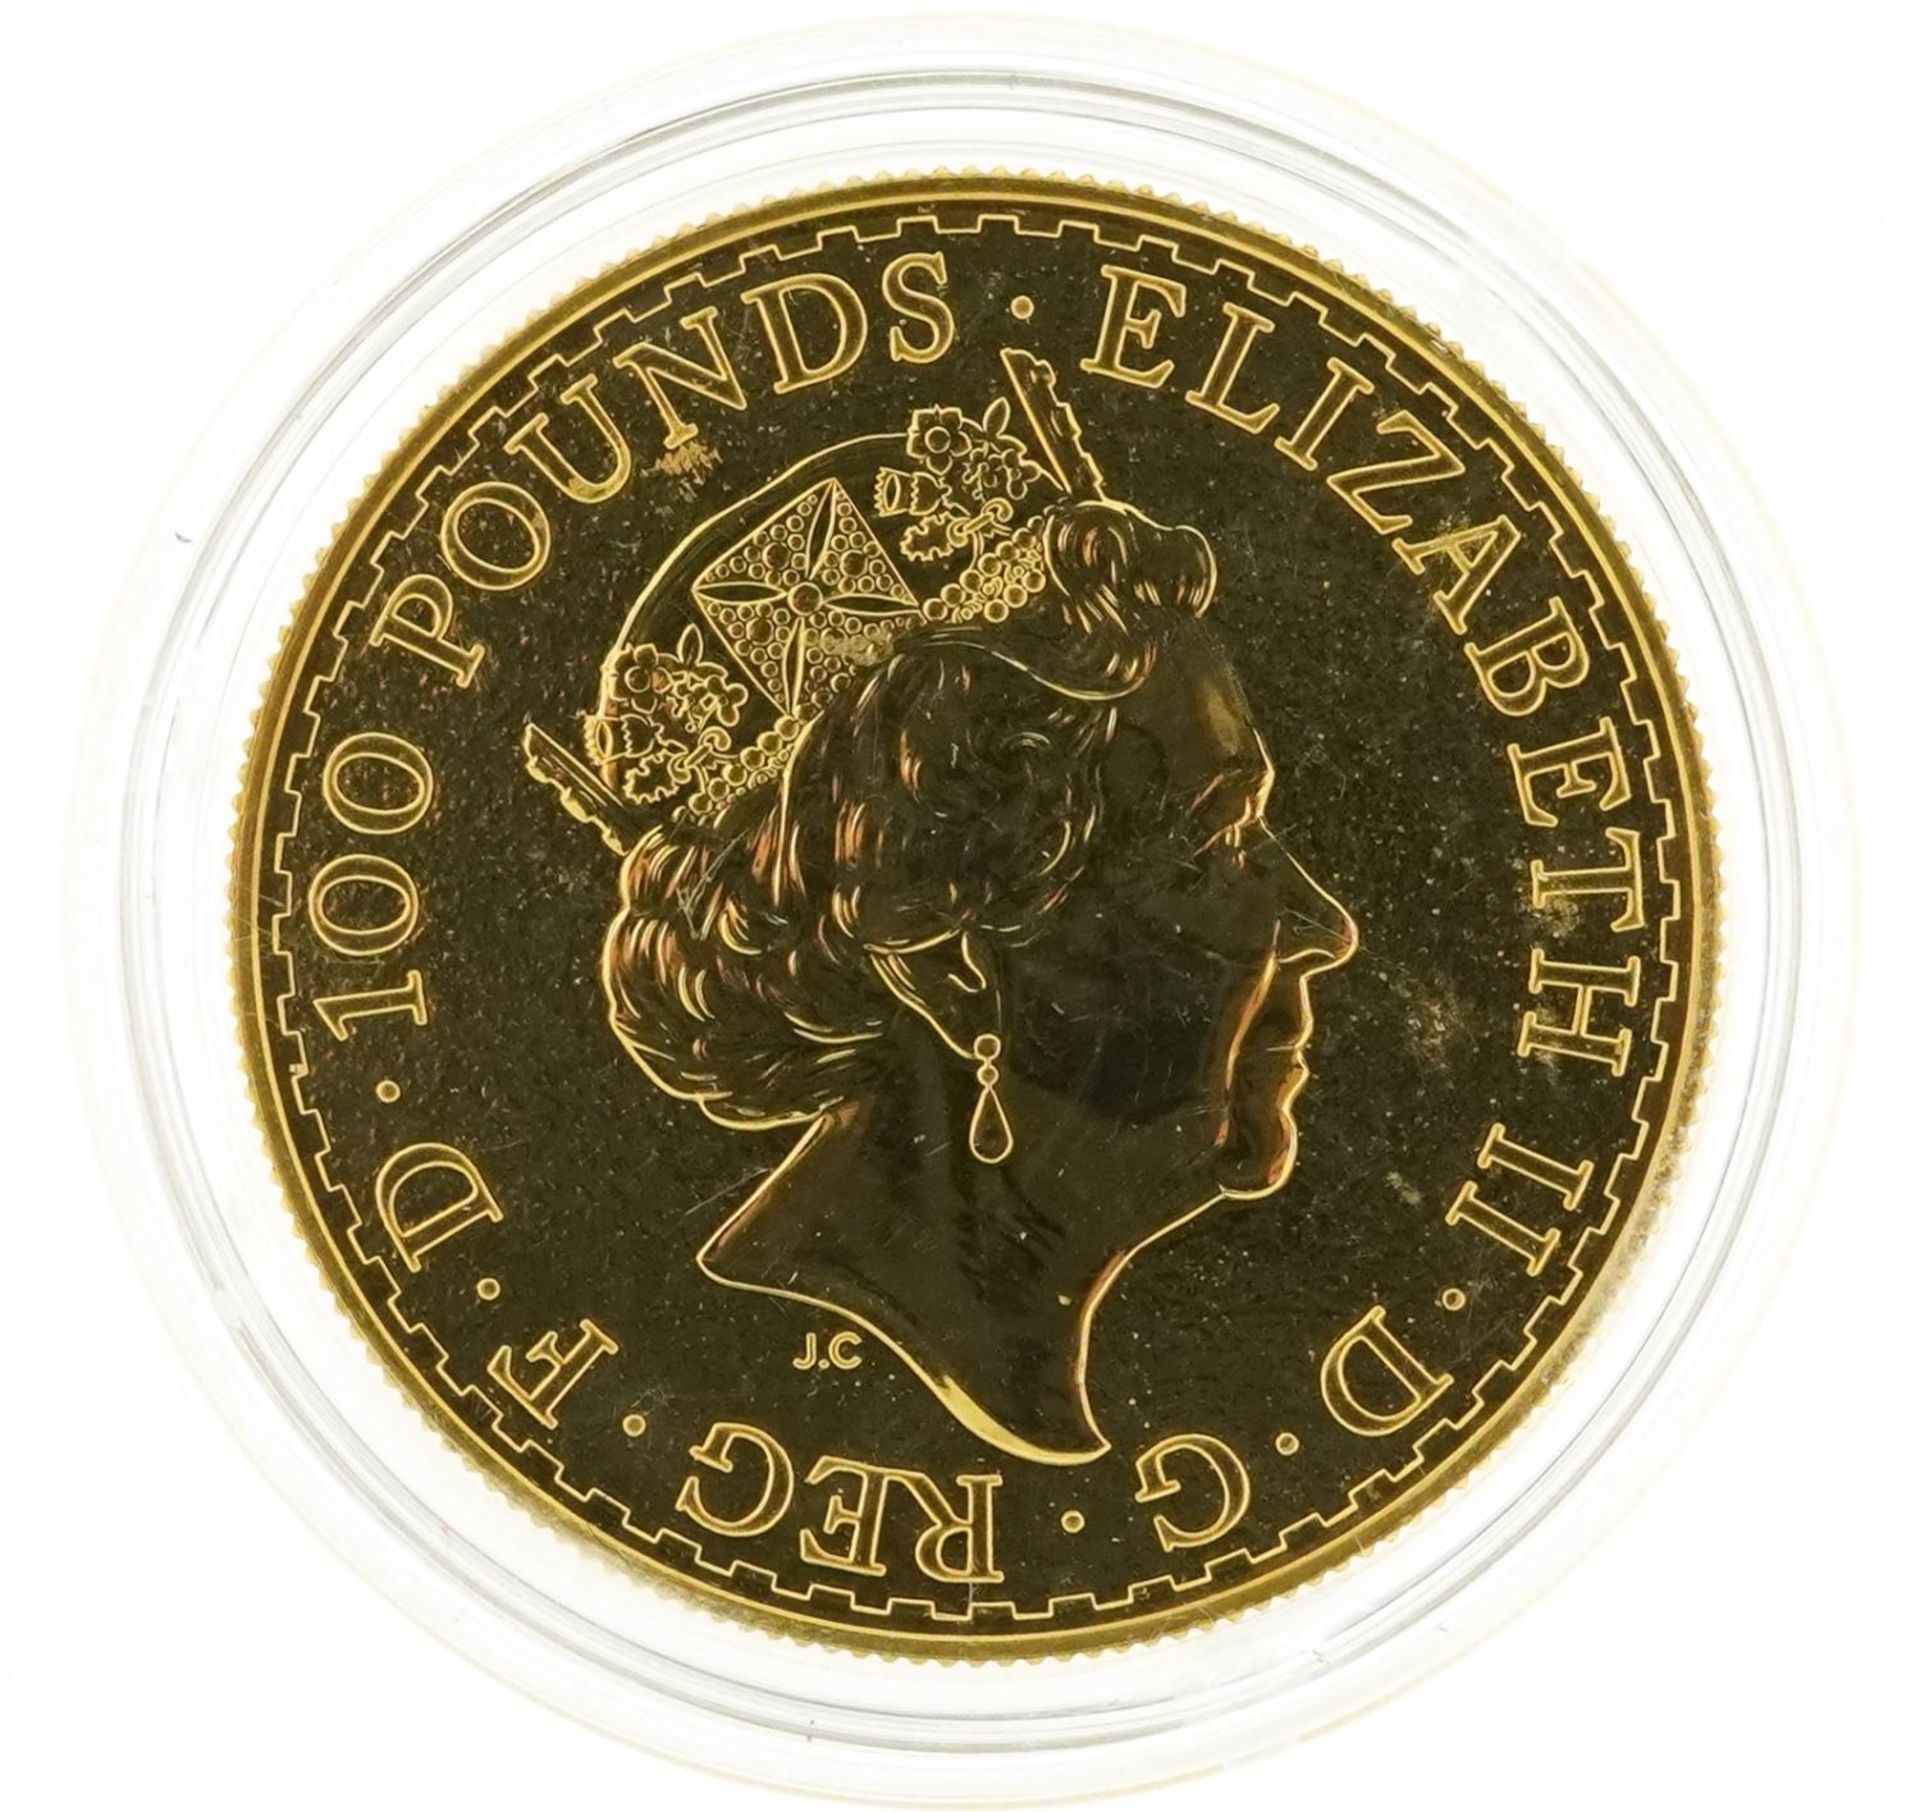 Elizabeth II 2017 Britannia one ounce fine gold one hundred pound coin - Image 2 of 2